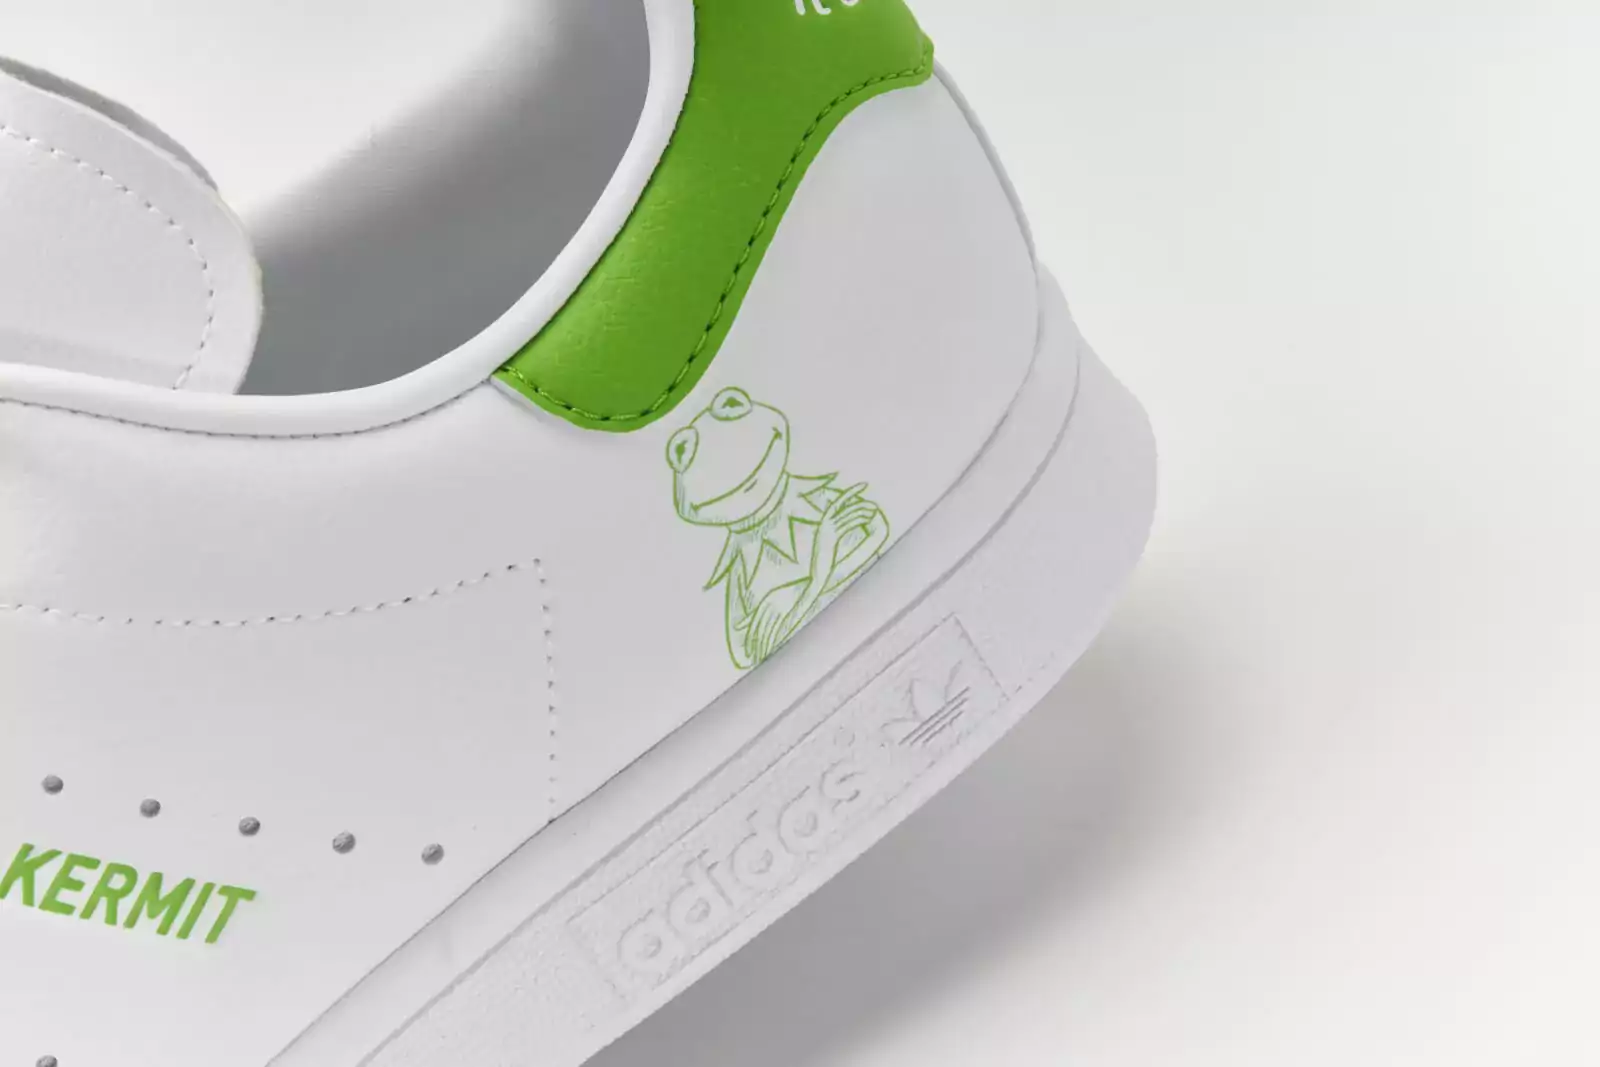 Why is Kermit the Frog so friendly with adidas Stan Smith